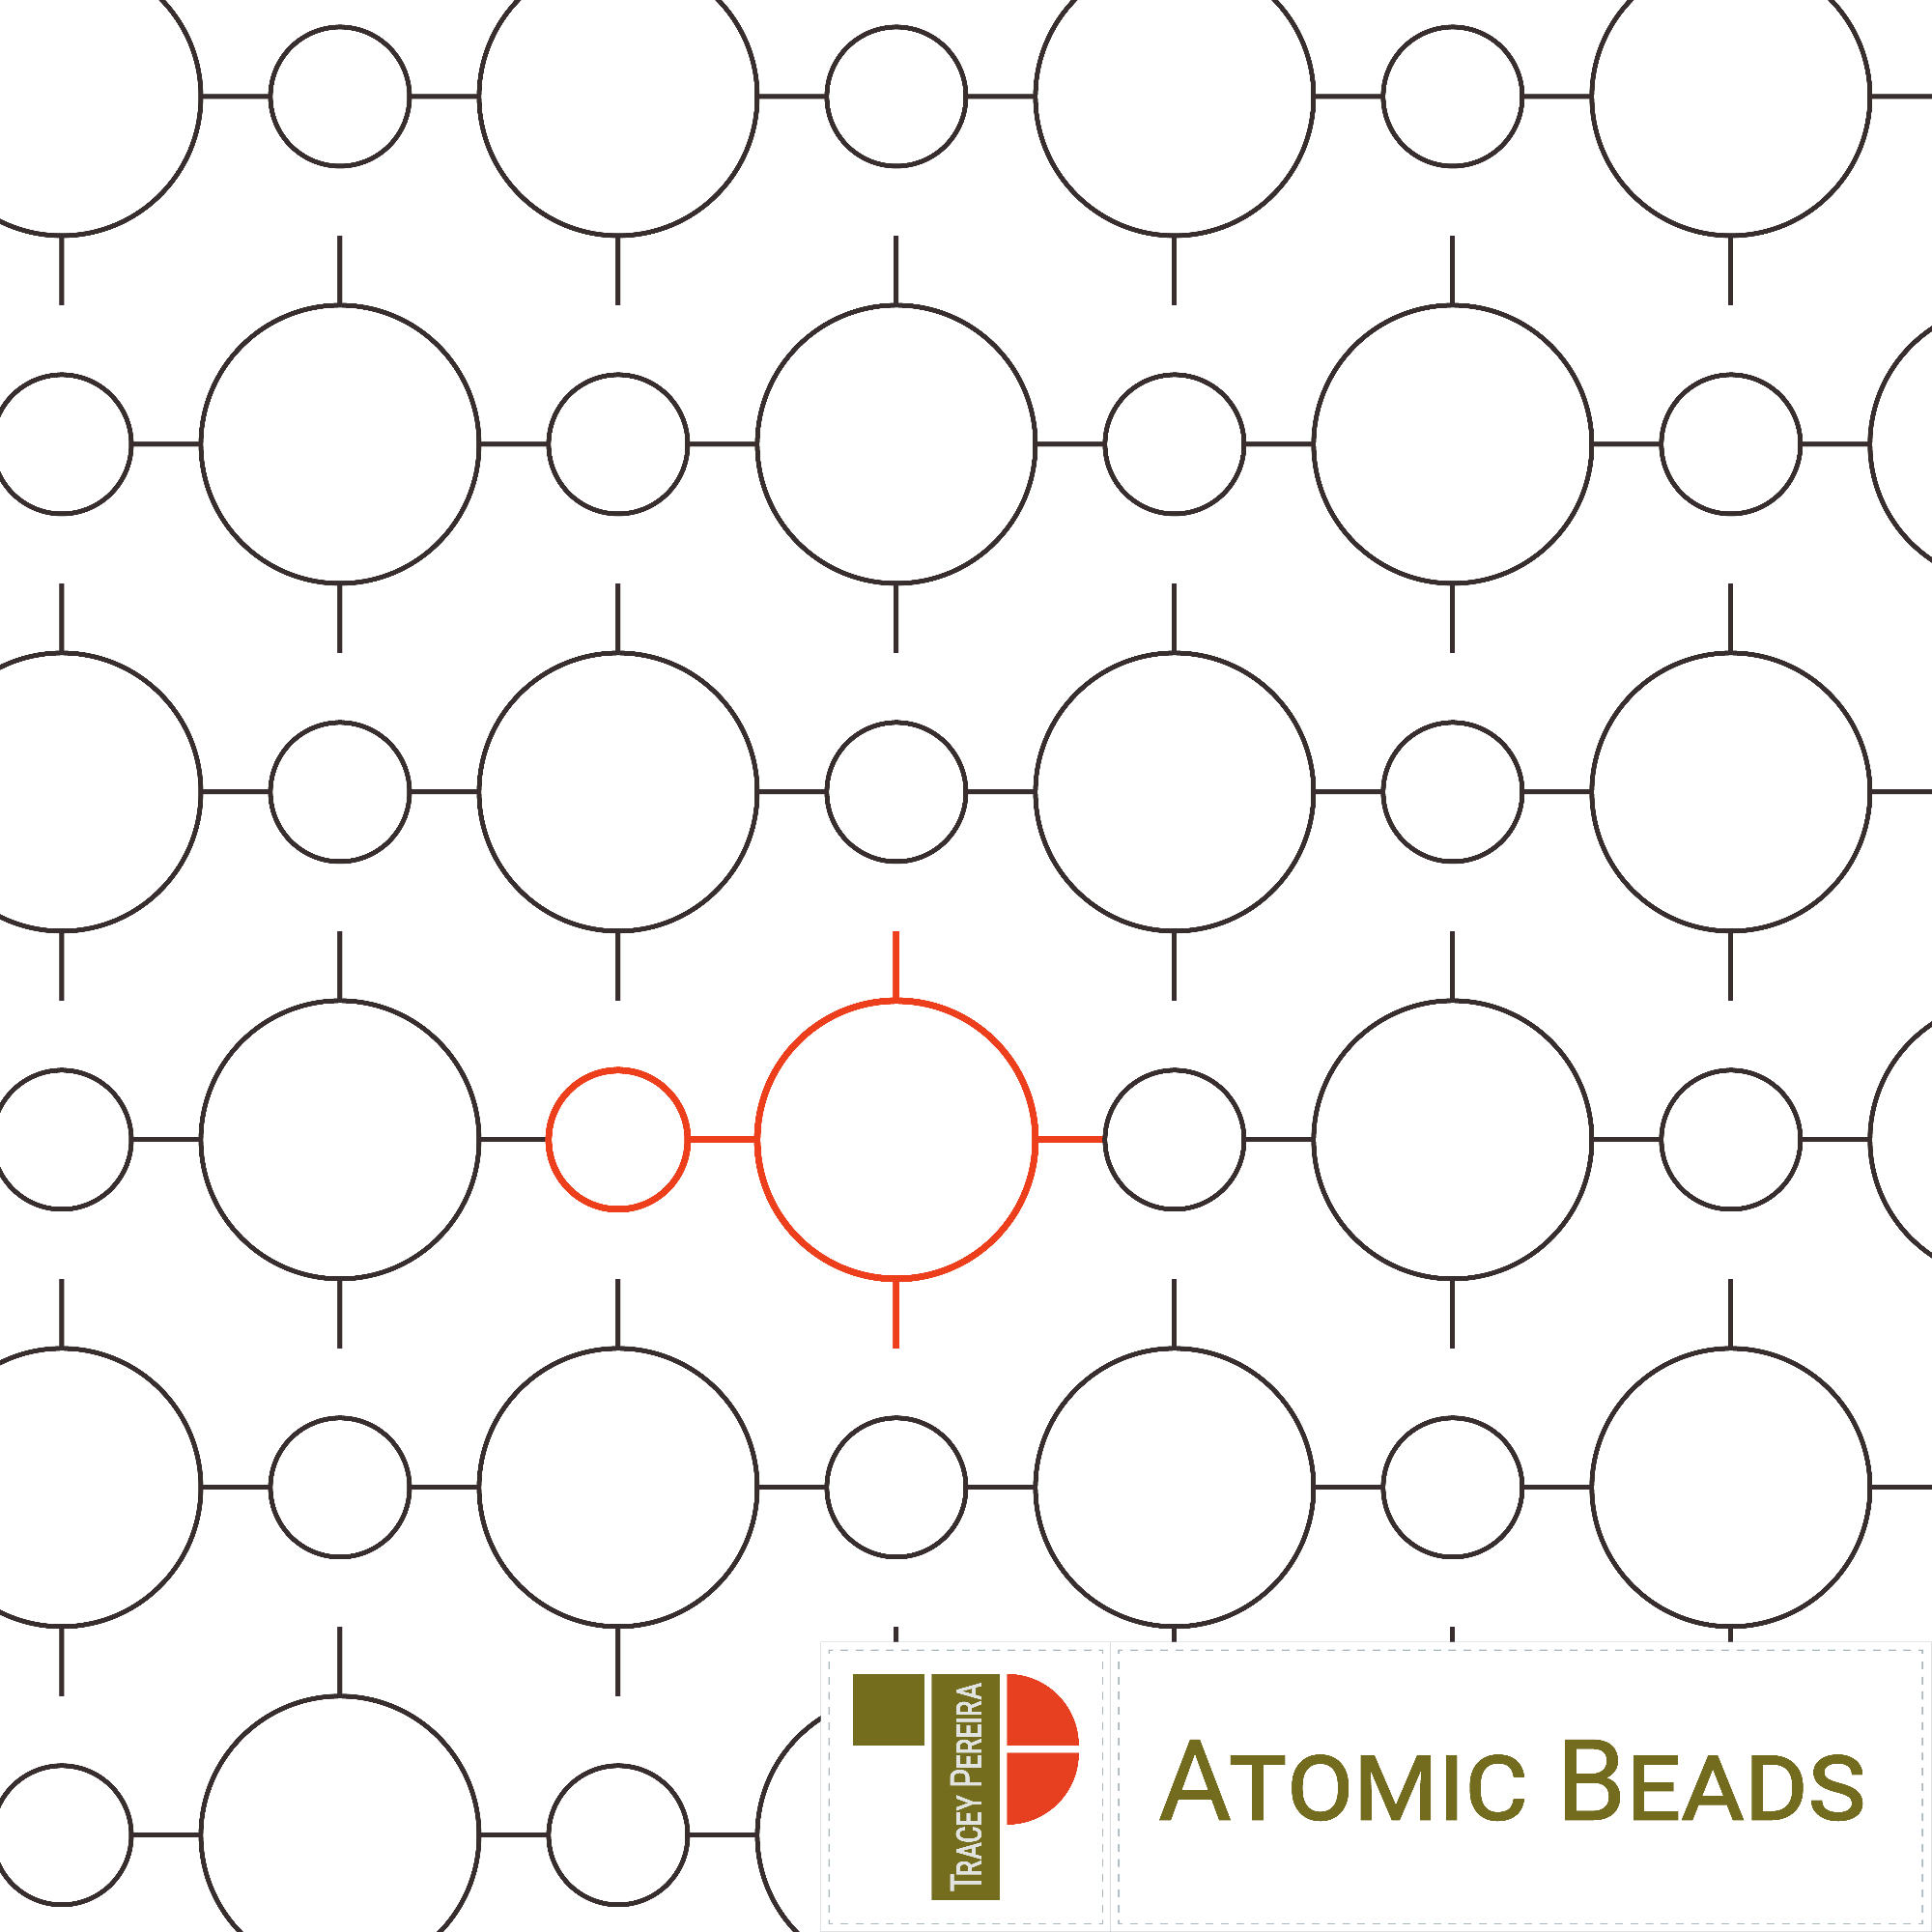 DLE2E061 Atomic Beads Layouts-02.png